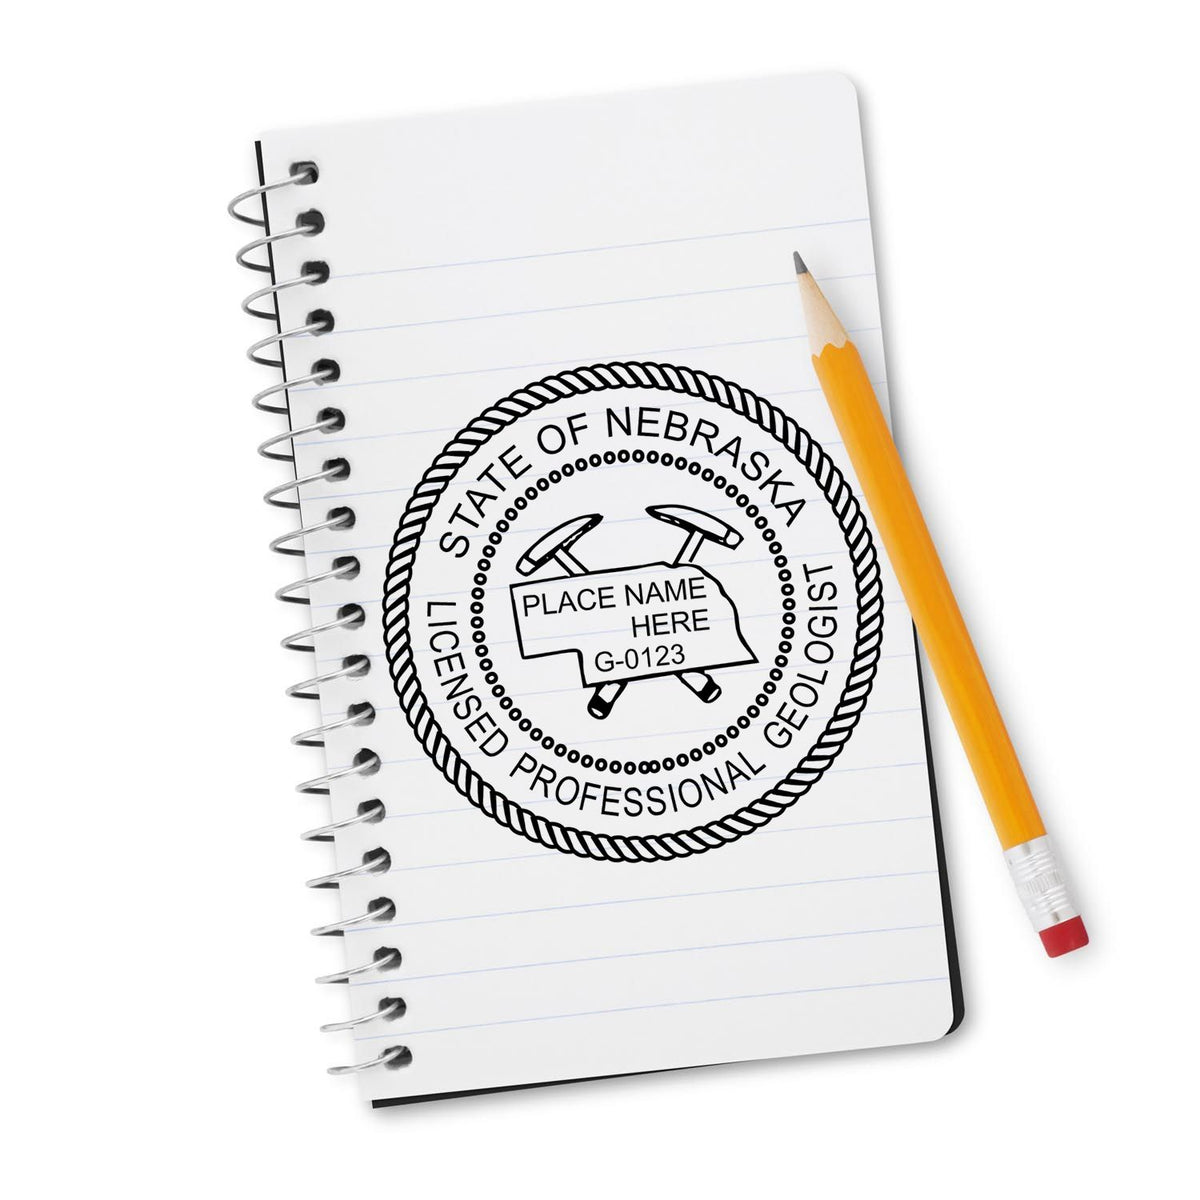 The Nebraska Professional Geologist Seal Stamp stamp impression comes to life with a crisp, detailed image stamped on paper - showcasing true professional quality.